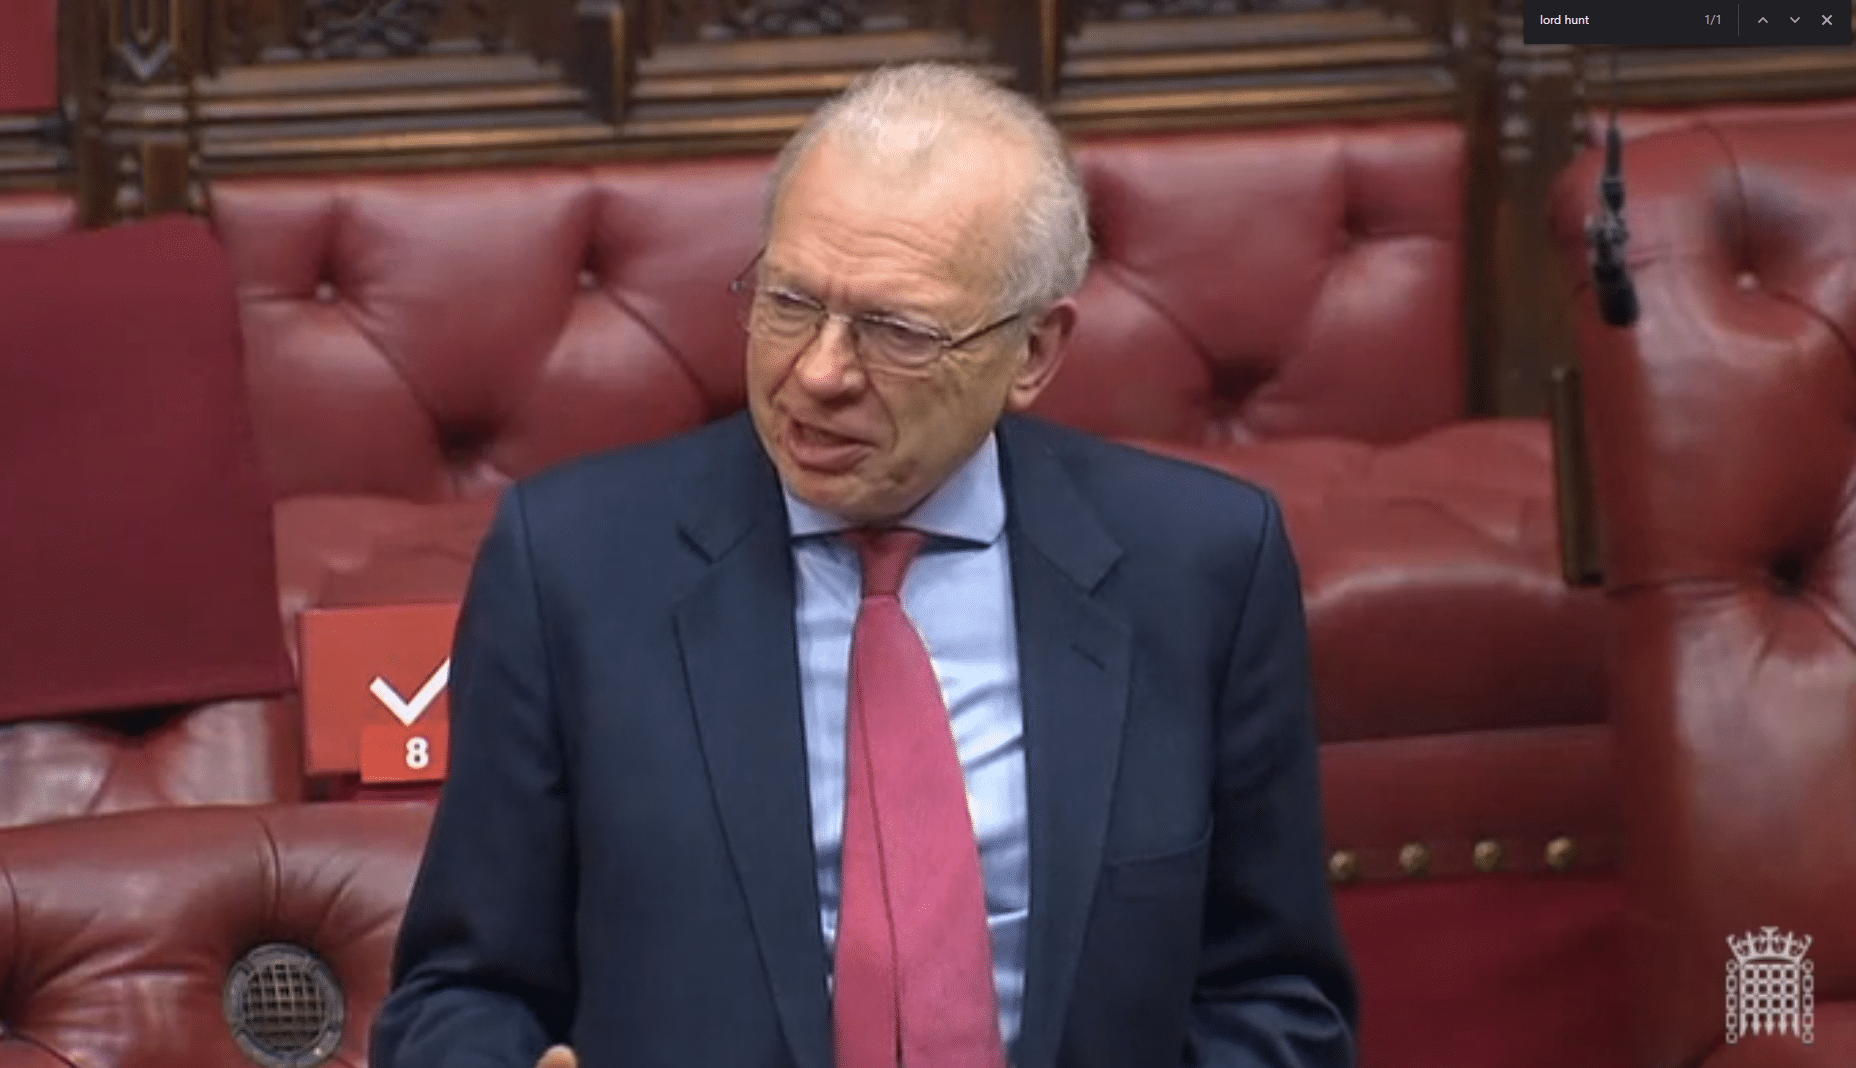 Labour peer Lord Hunt of Kings Heath lashed out at the wording of a bill which would allow ministers to take paid maternity leave 